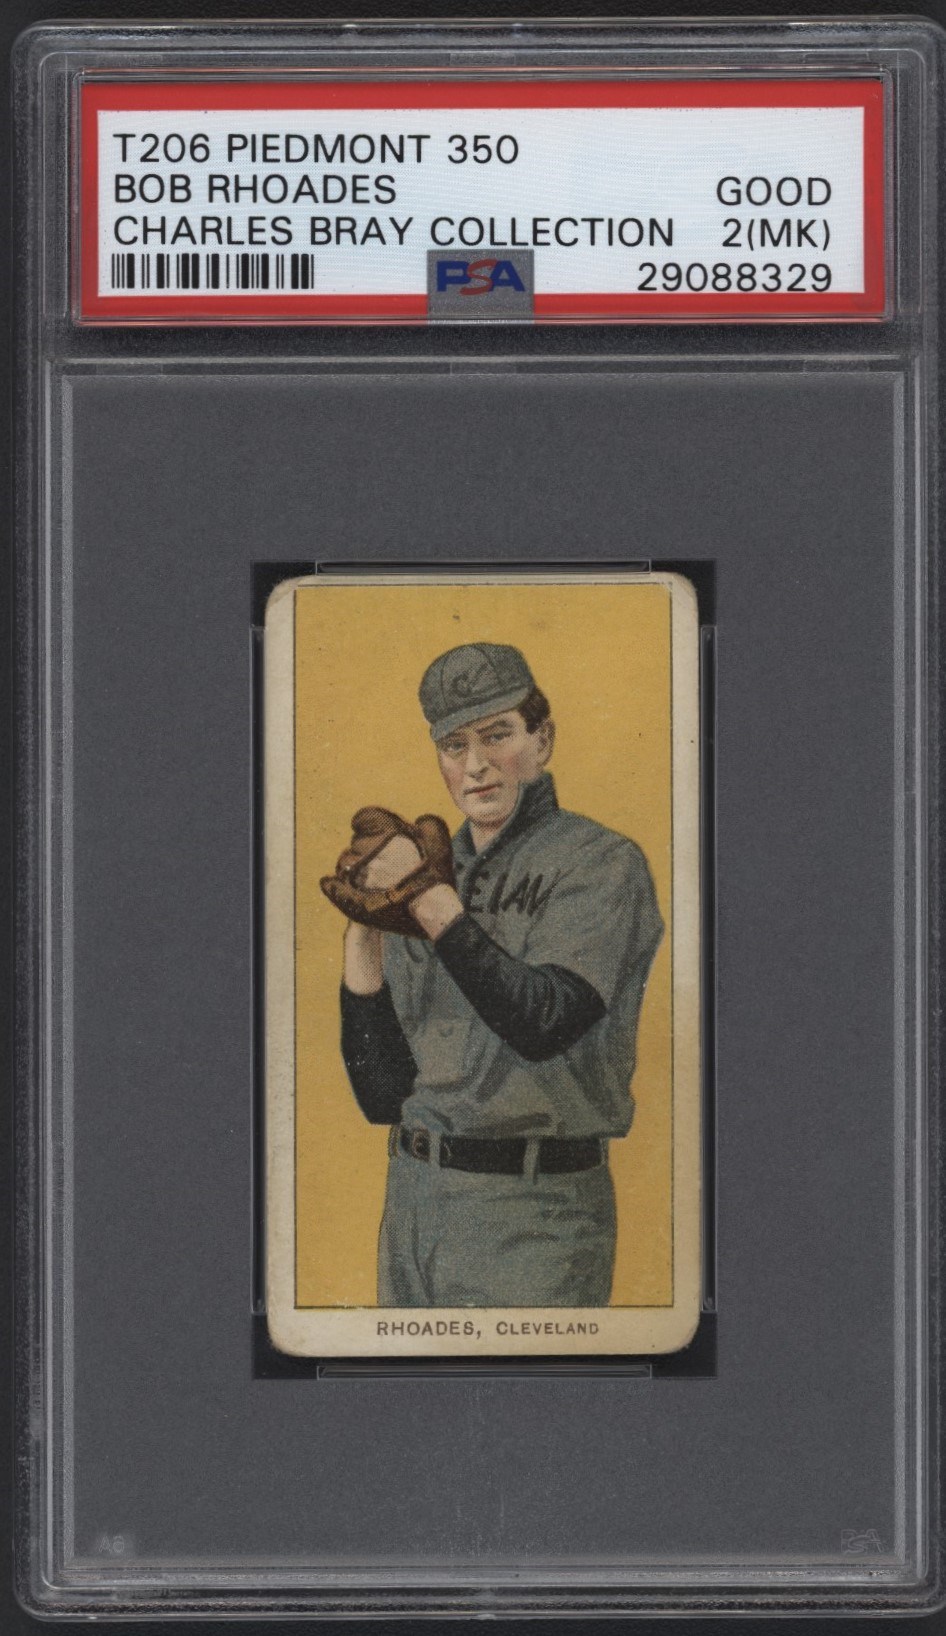 - T206 Piedmont 350 Bob Rhodes PSA 2 From the Charles Bray Collection